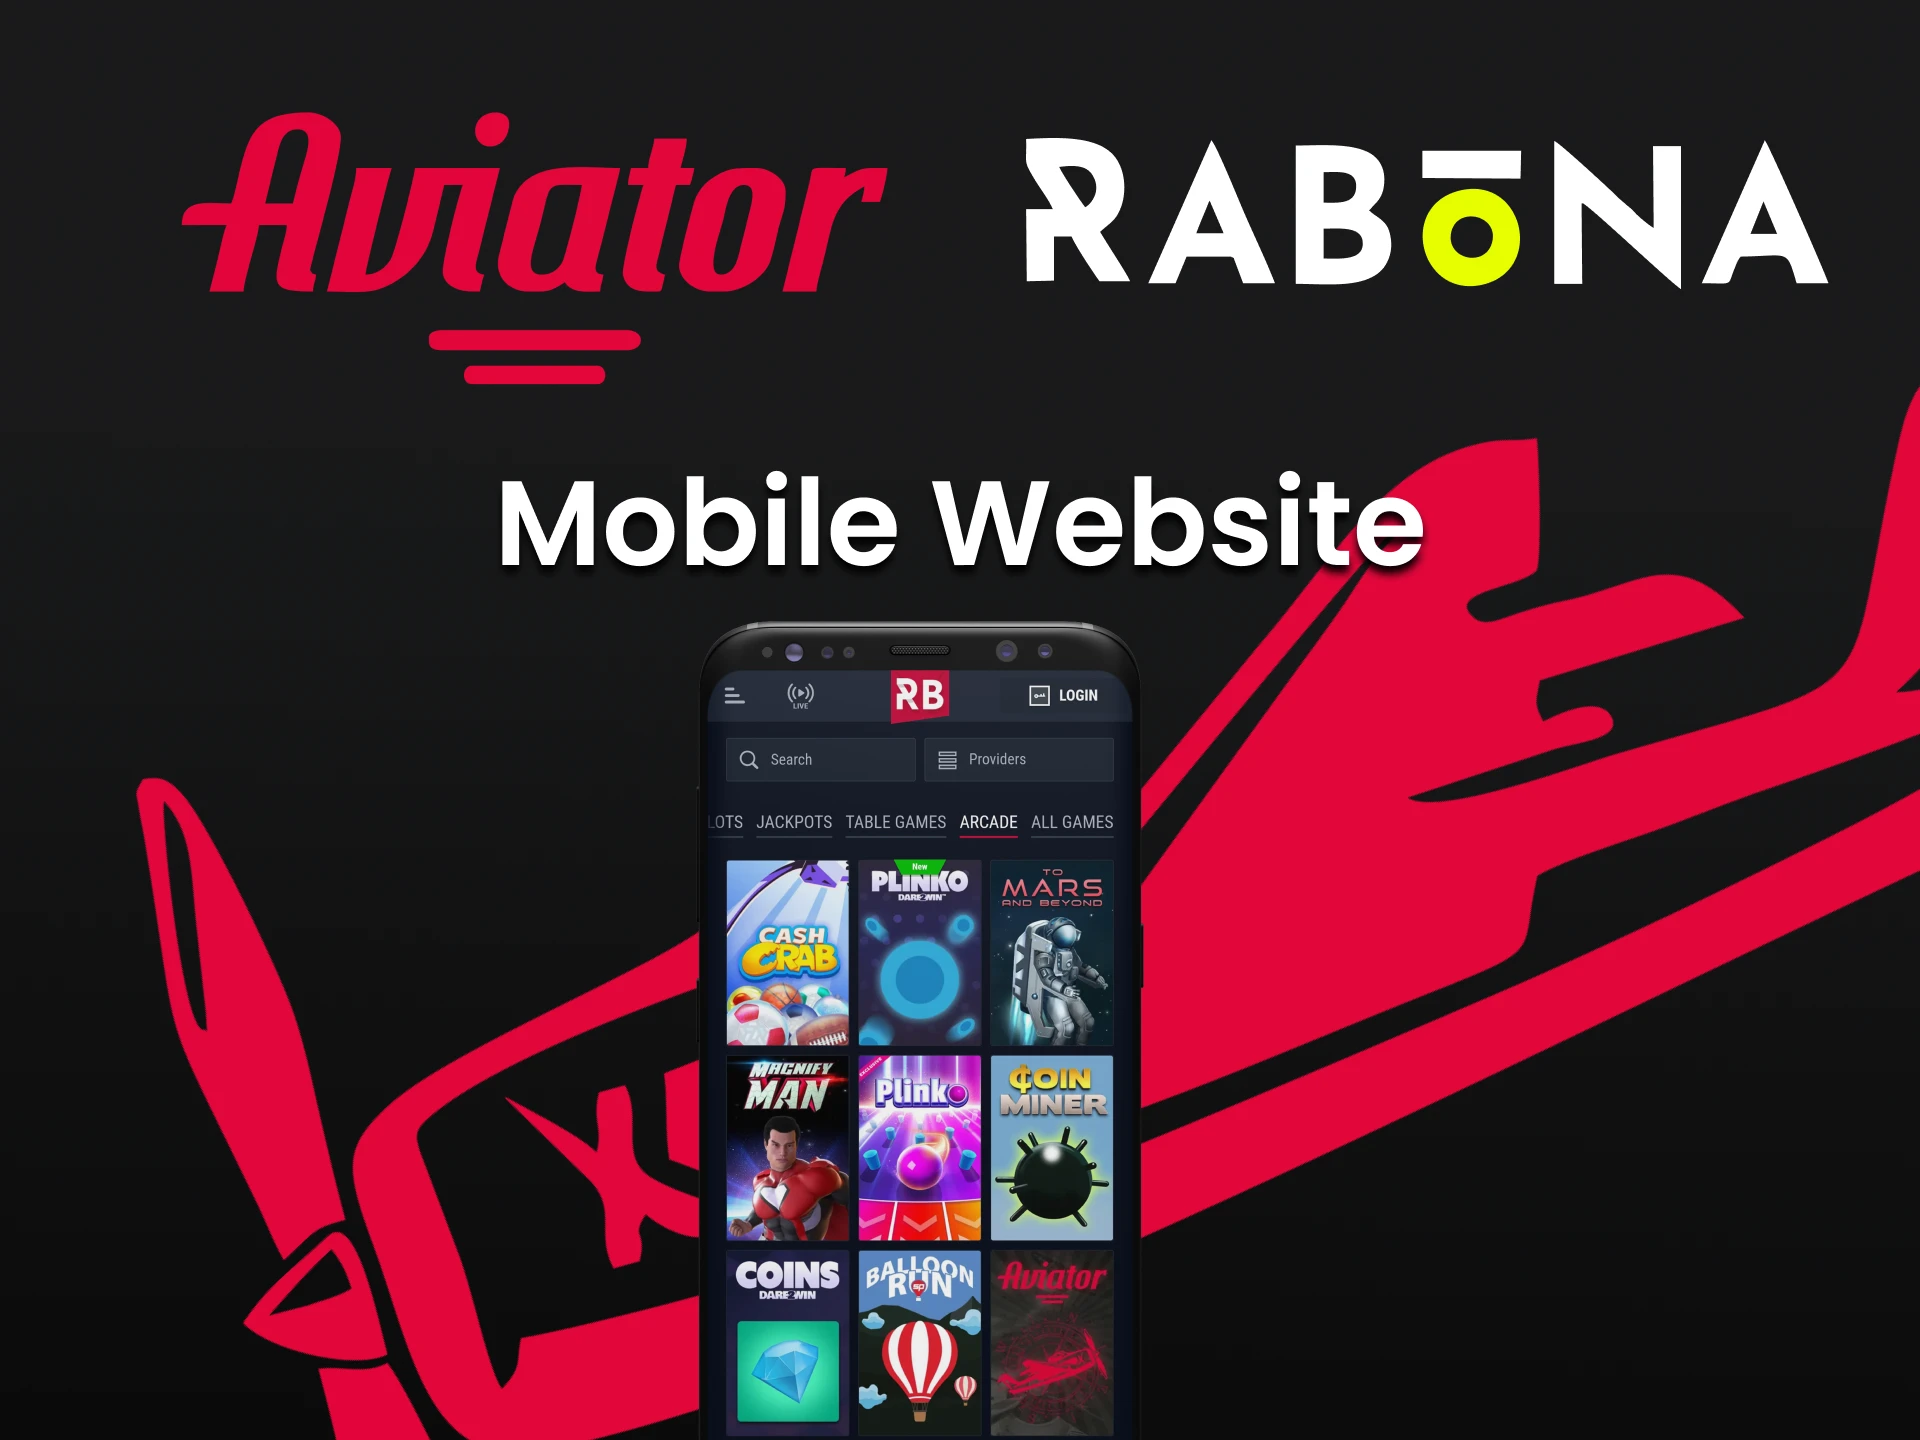 You can use your phone to play Aviator on the Rabona website.